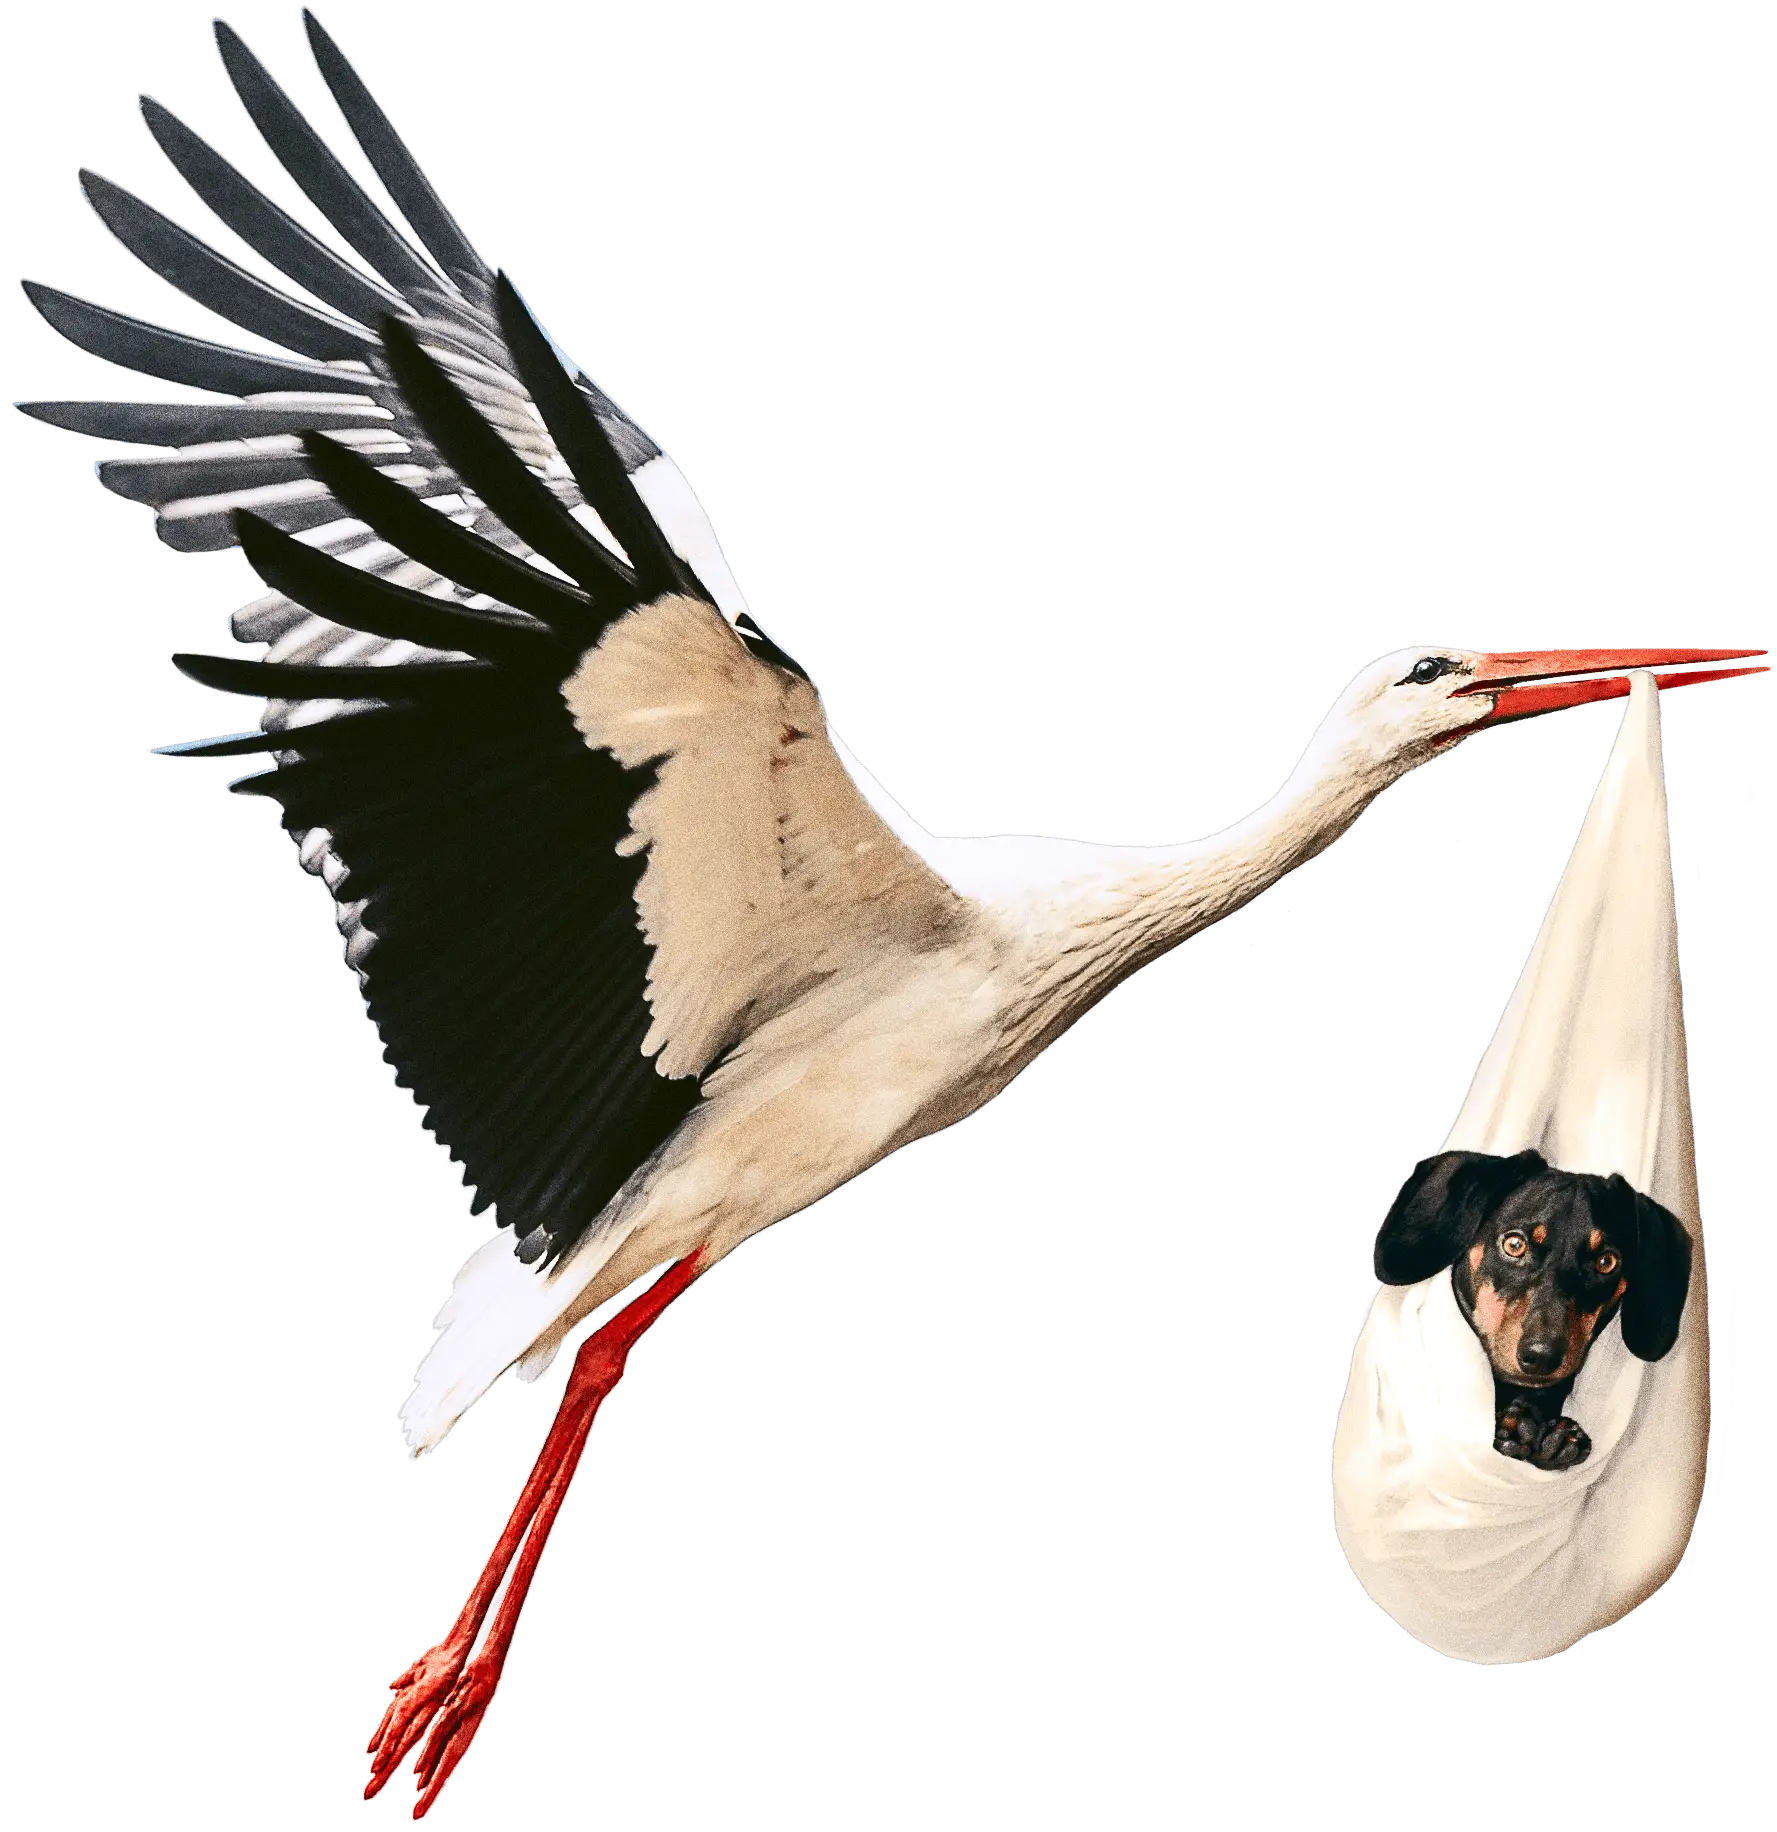 A flying crane carries a puppy in a diaper